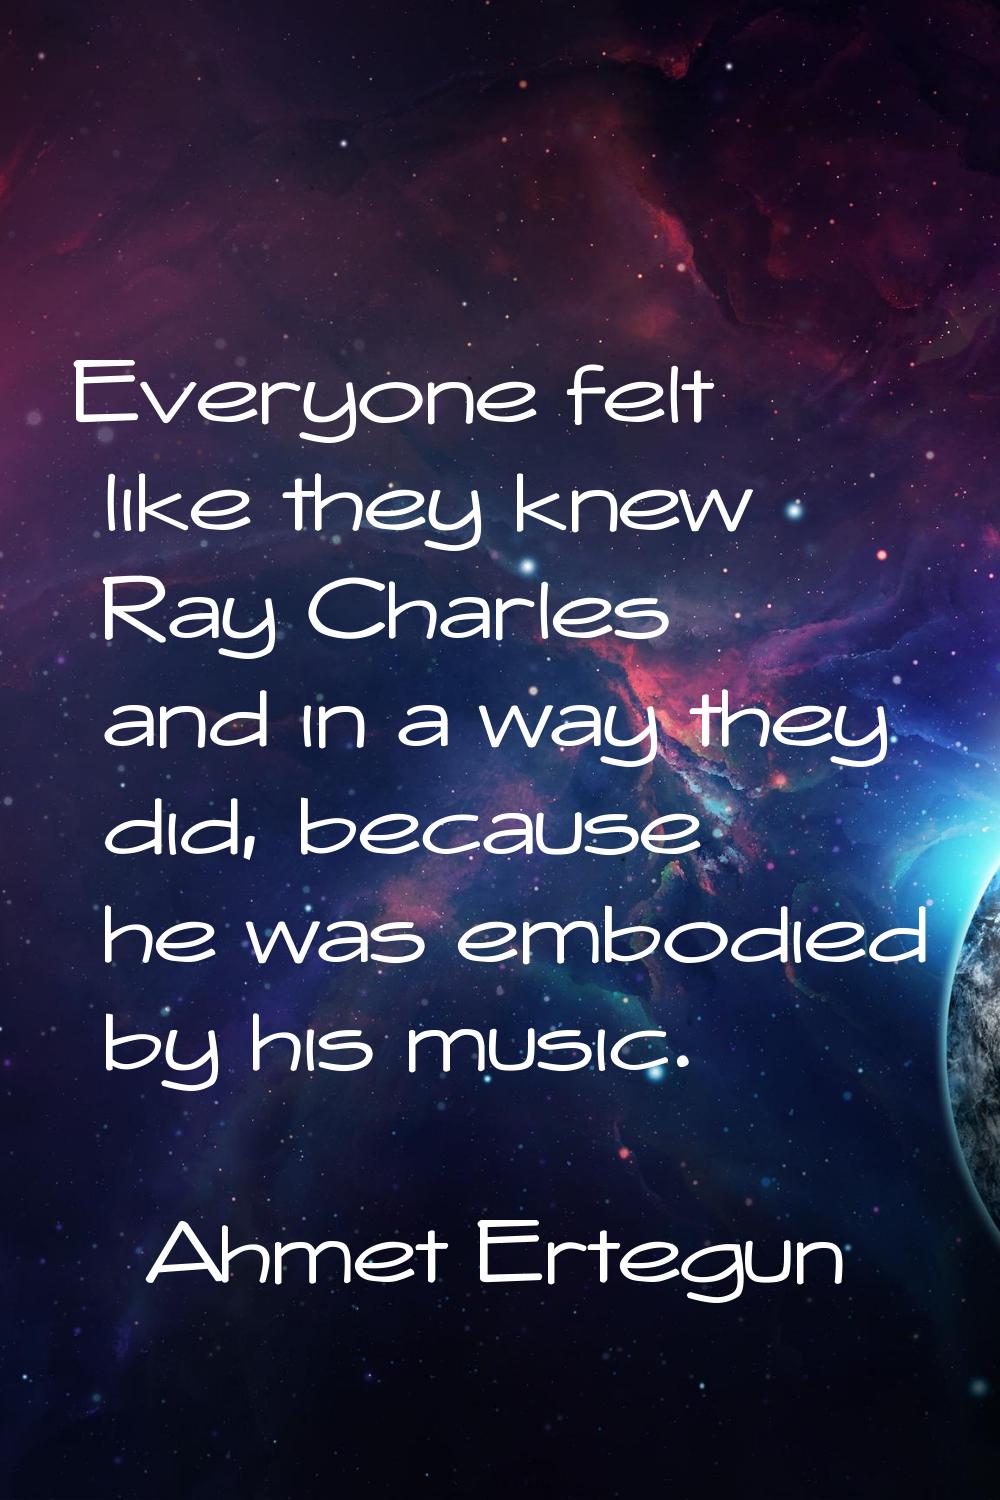 Everyone felt like they knew Ray Charles and in a way they did, because he was embodied by his musi